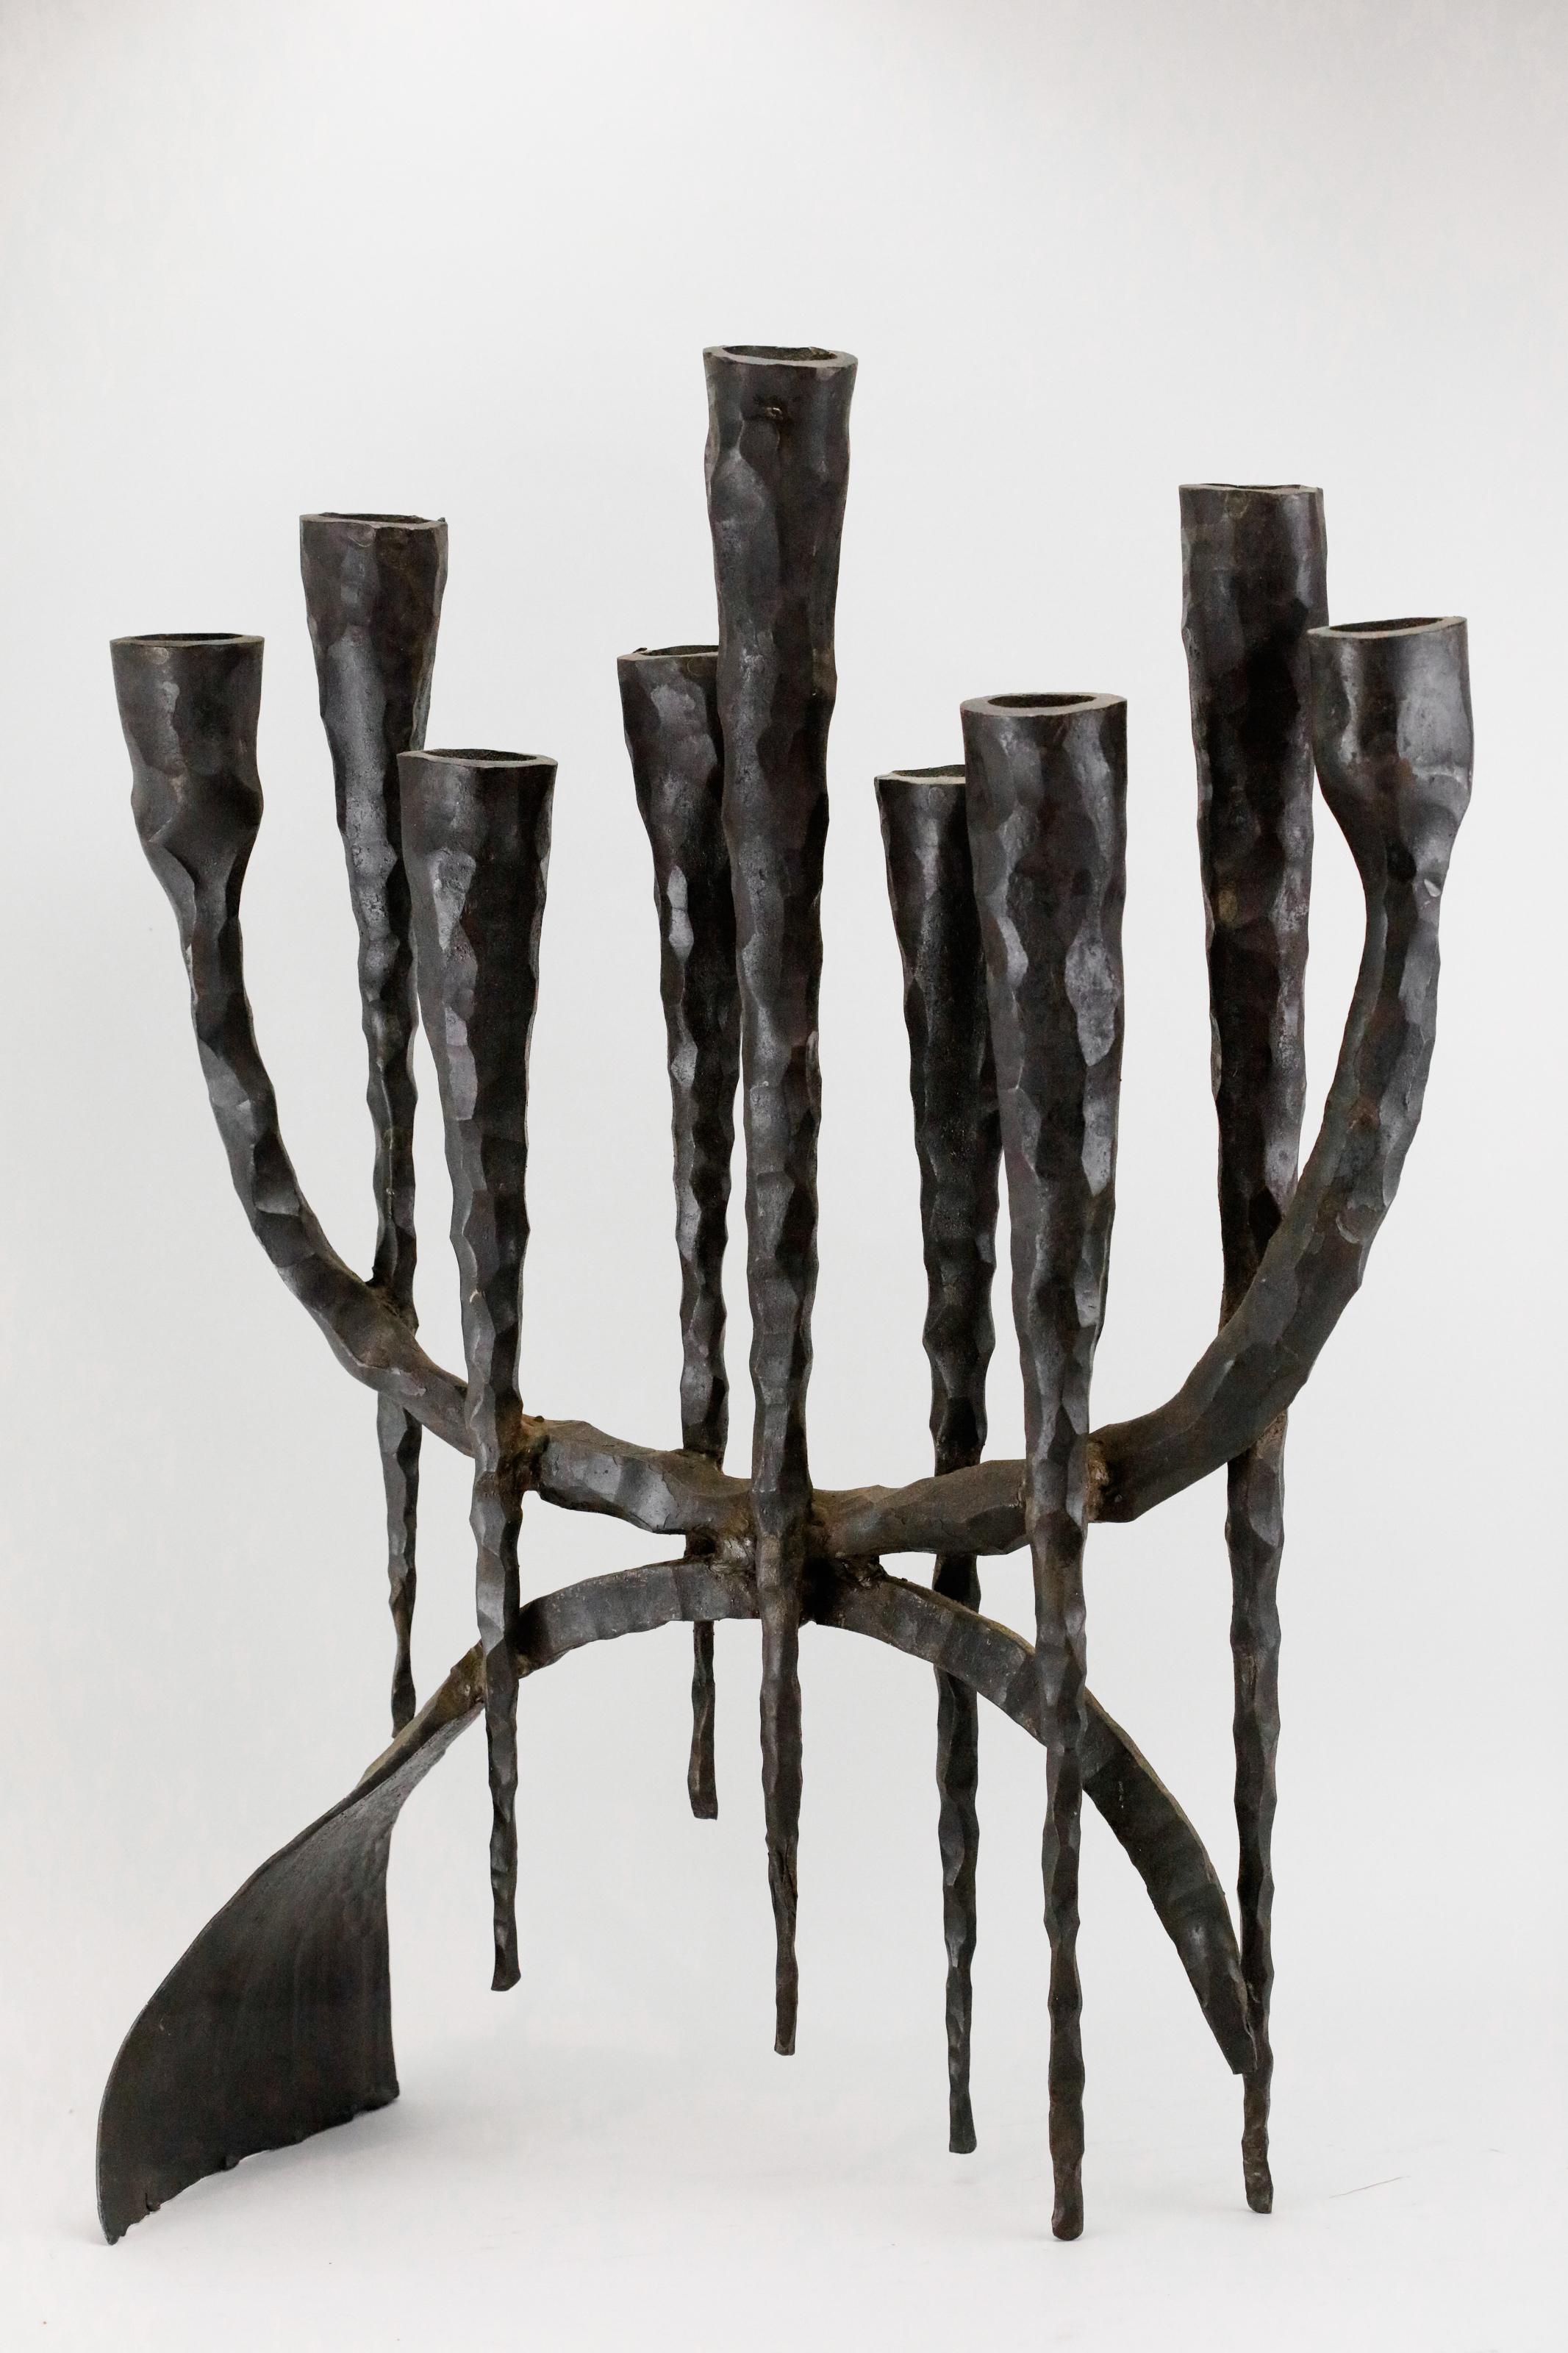 Large, hand forged, iron Hanukkah lamp Menorah in the style known as “Brutalism”, David Palombo, Jerusalem, Israel, circa 1960.

David Palombo (1920-1966), was a sculptor and painter. He was born in Turkey and immigrated to Israel with his parents